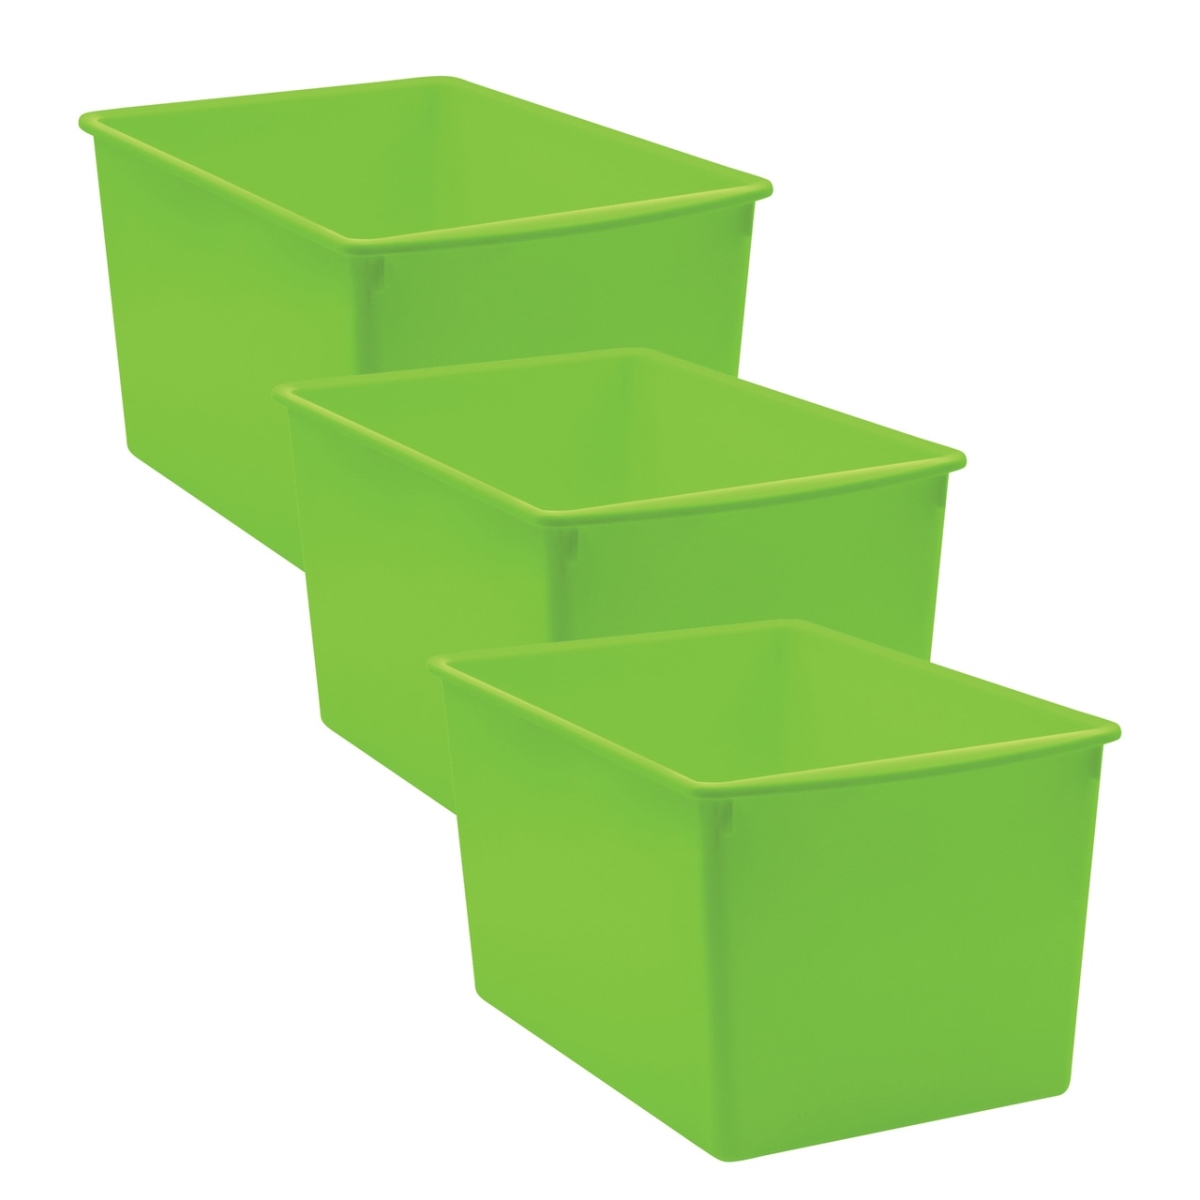 Picture of Teacher Created Resources TCR20429-3 Plastic Multi-Purpose Bin, Lime - Pack of 3